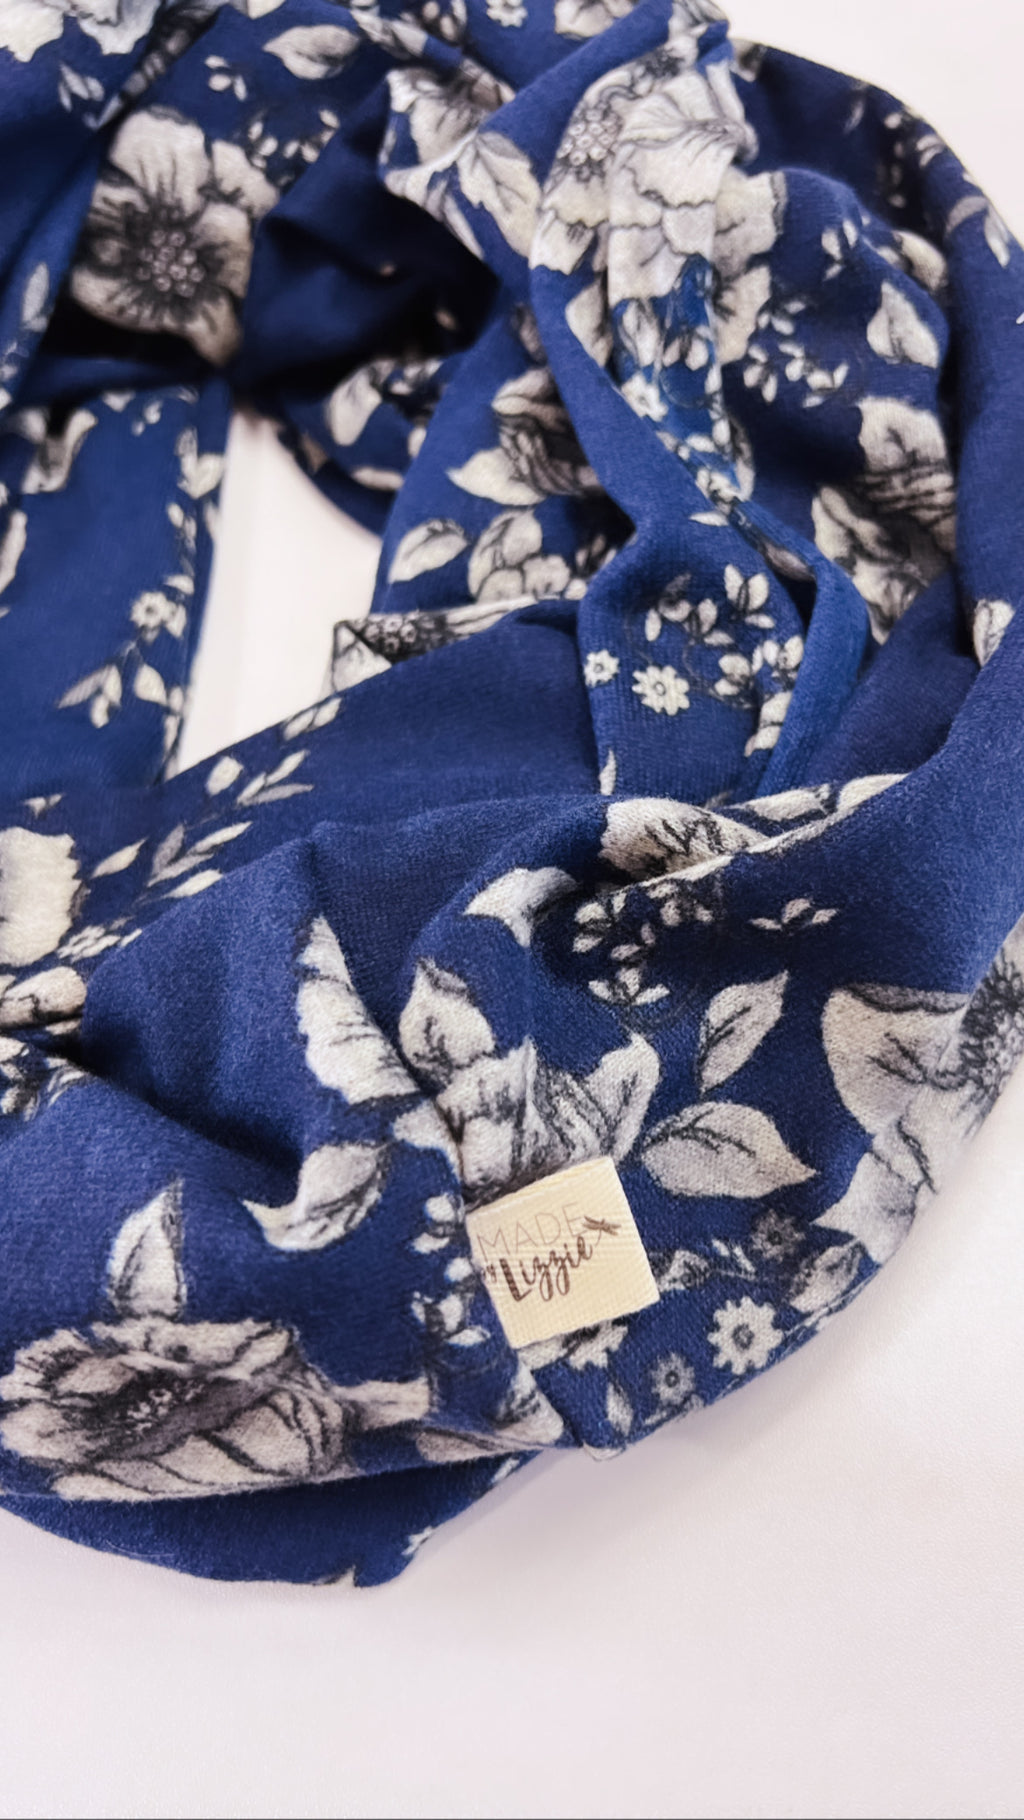 Navy Floral Infinity Scarf